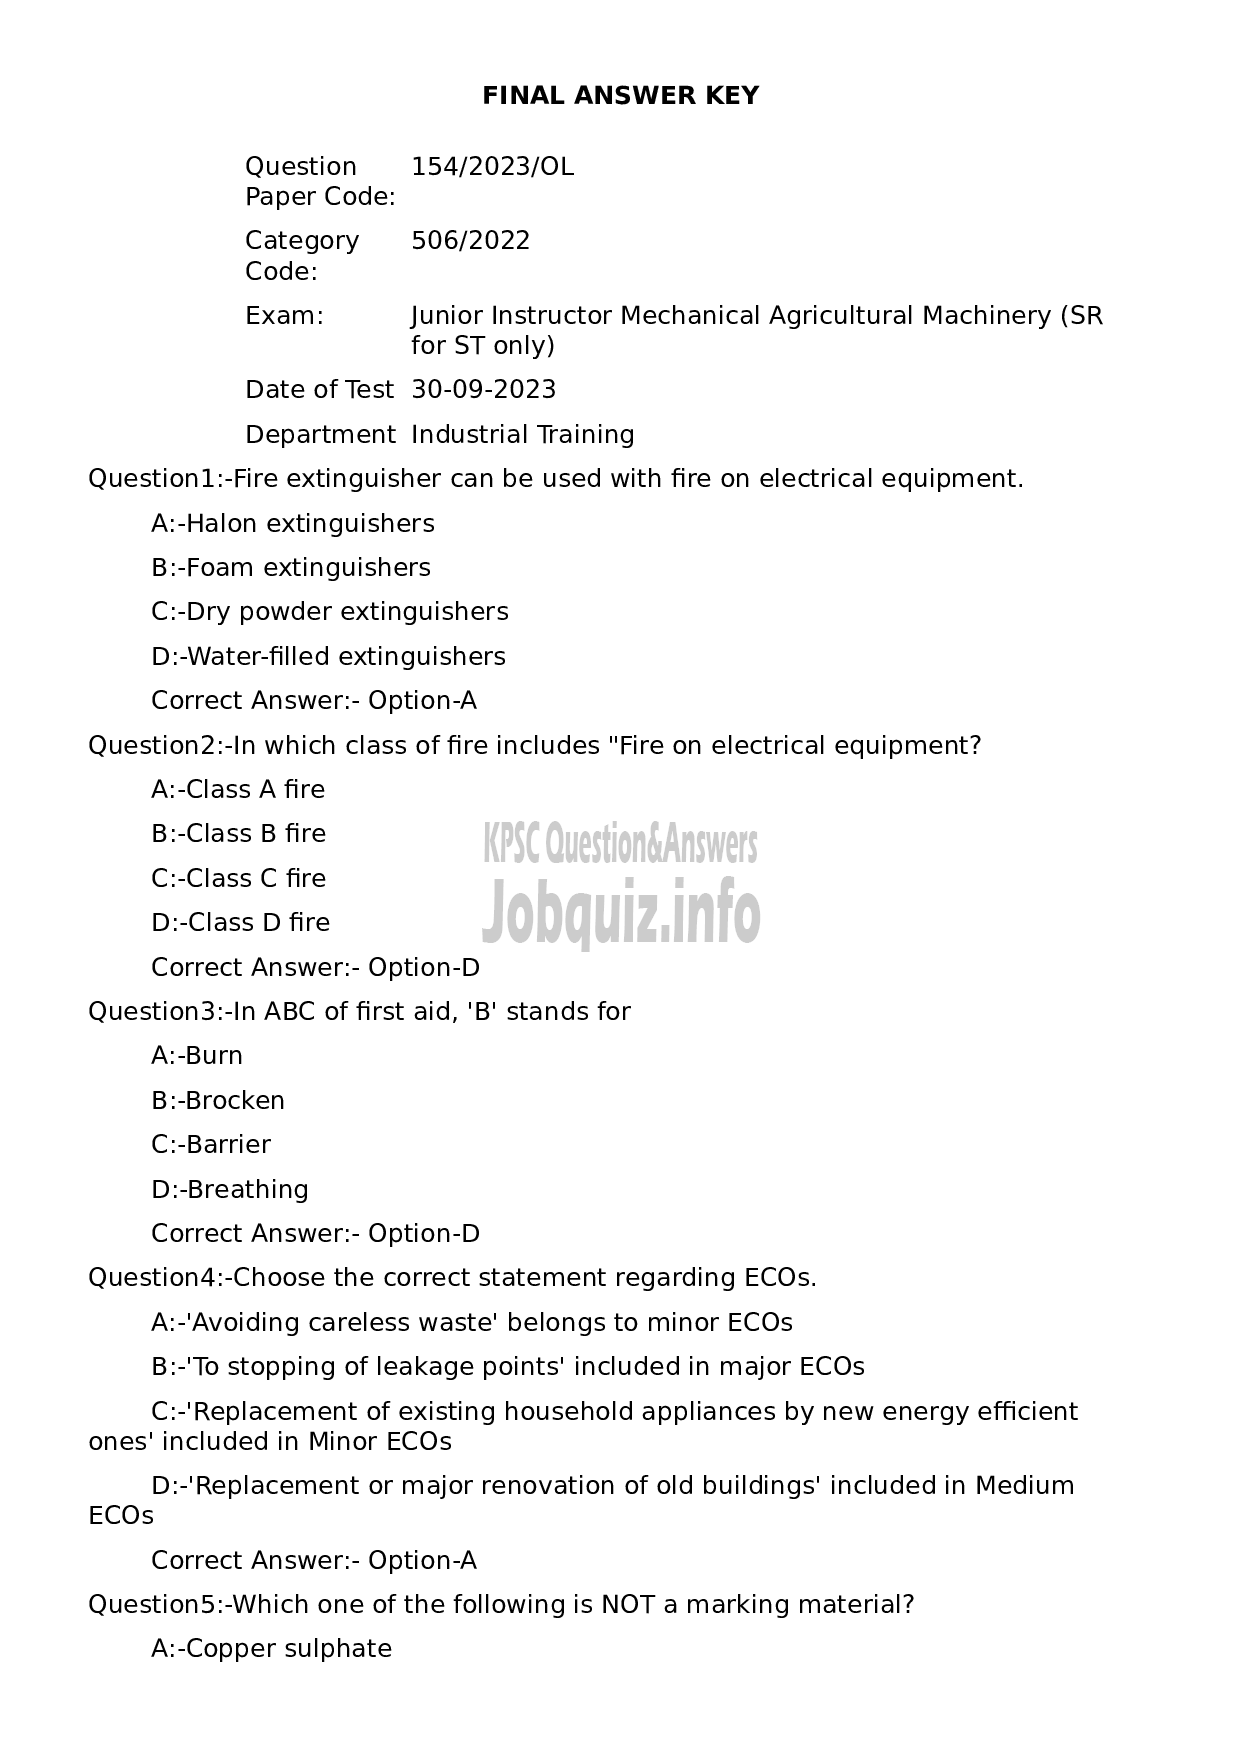 Kerala PSC Question Paper - Junior Instructor Mechanical Agricultural Machinery (SR for ST only)-1